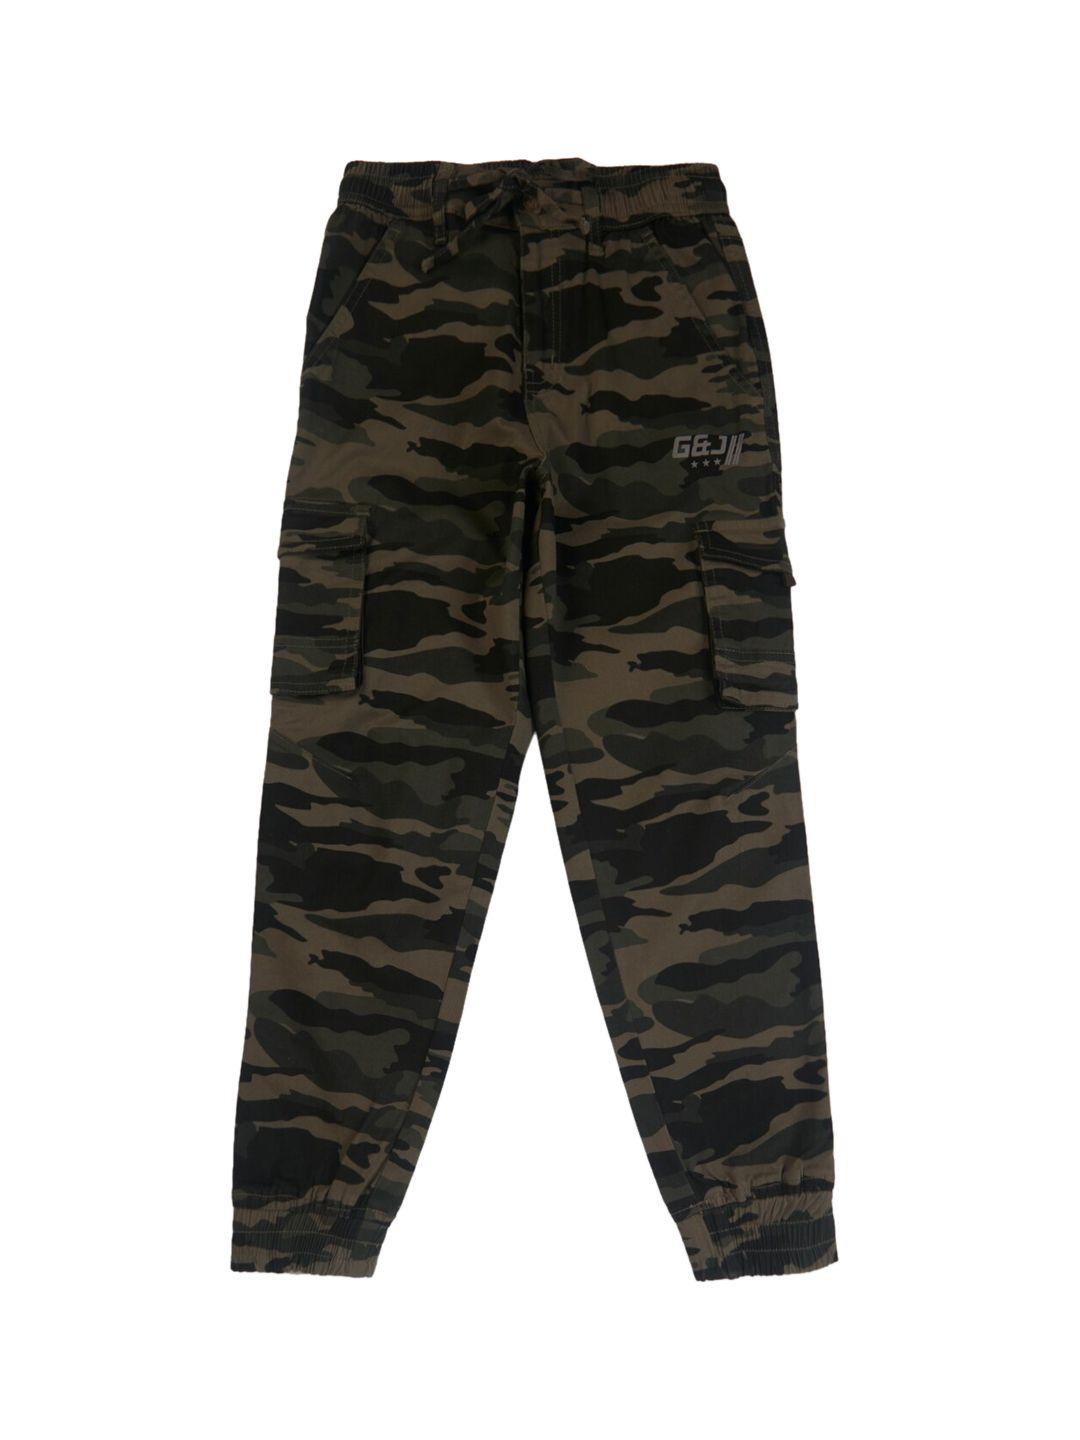 gini and jony boys cotton camouflage printed cargos trousers